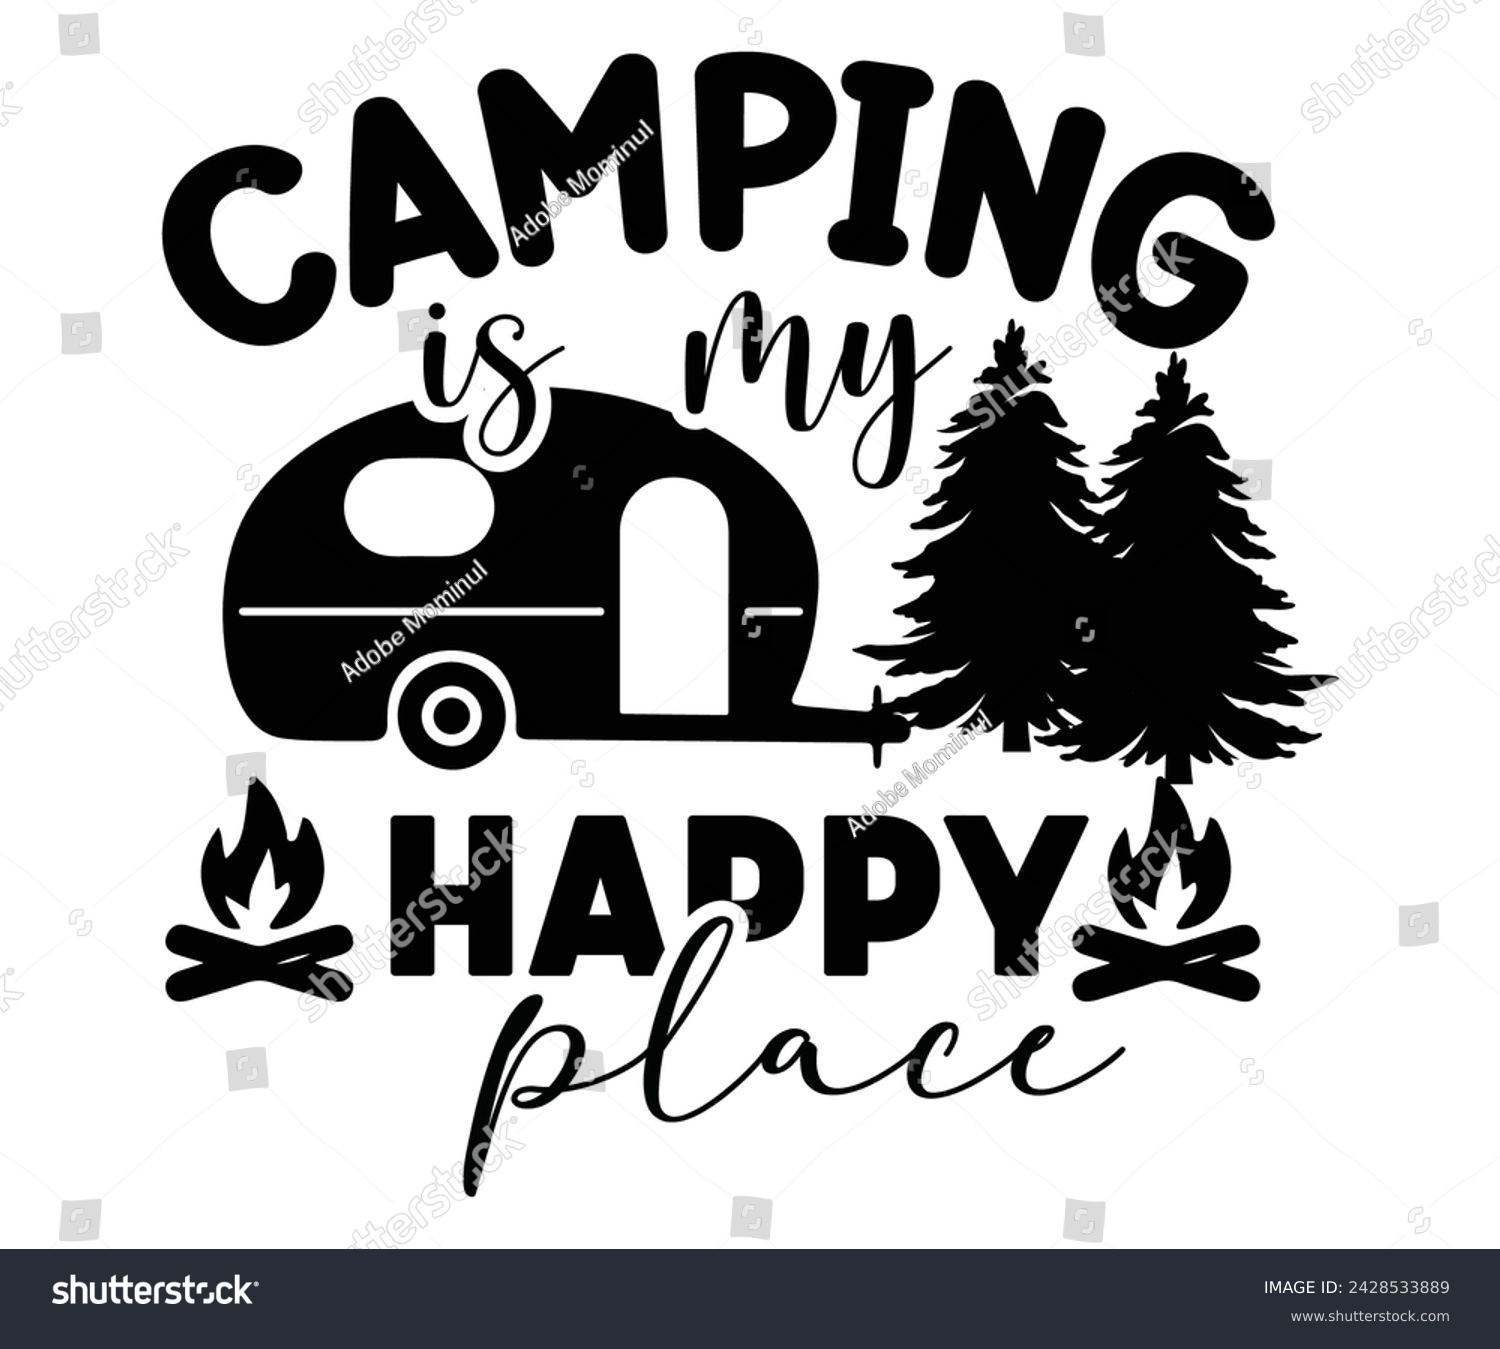 SVG of Camping Is My Happy Place Svg,Happy Camper Svg,Camping Svg,Adventure Svg,Hiking Svg,Camp Saying,Camp Life Svg,Svg Cut Files, Png,Mountain T-shirt,Instant Download svg